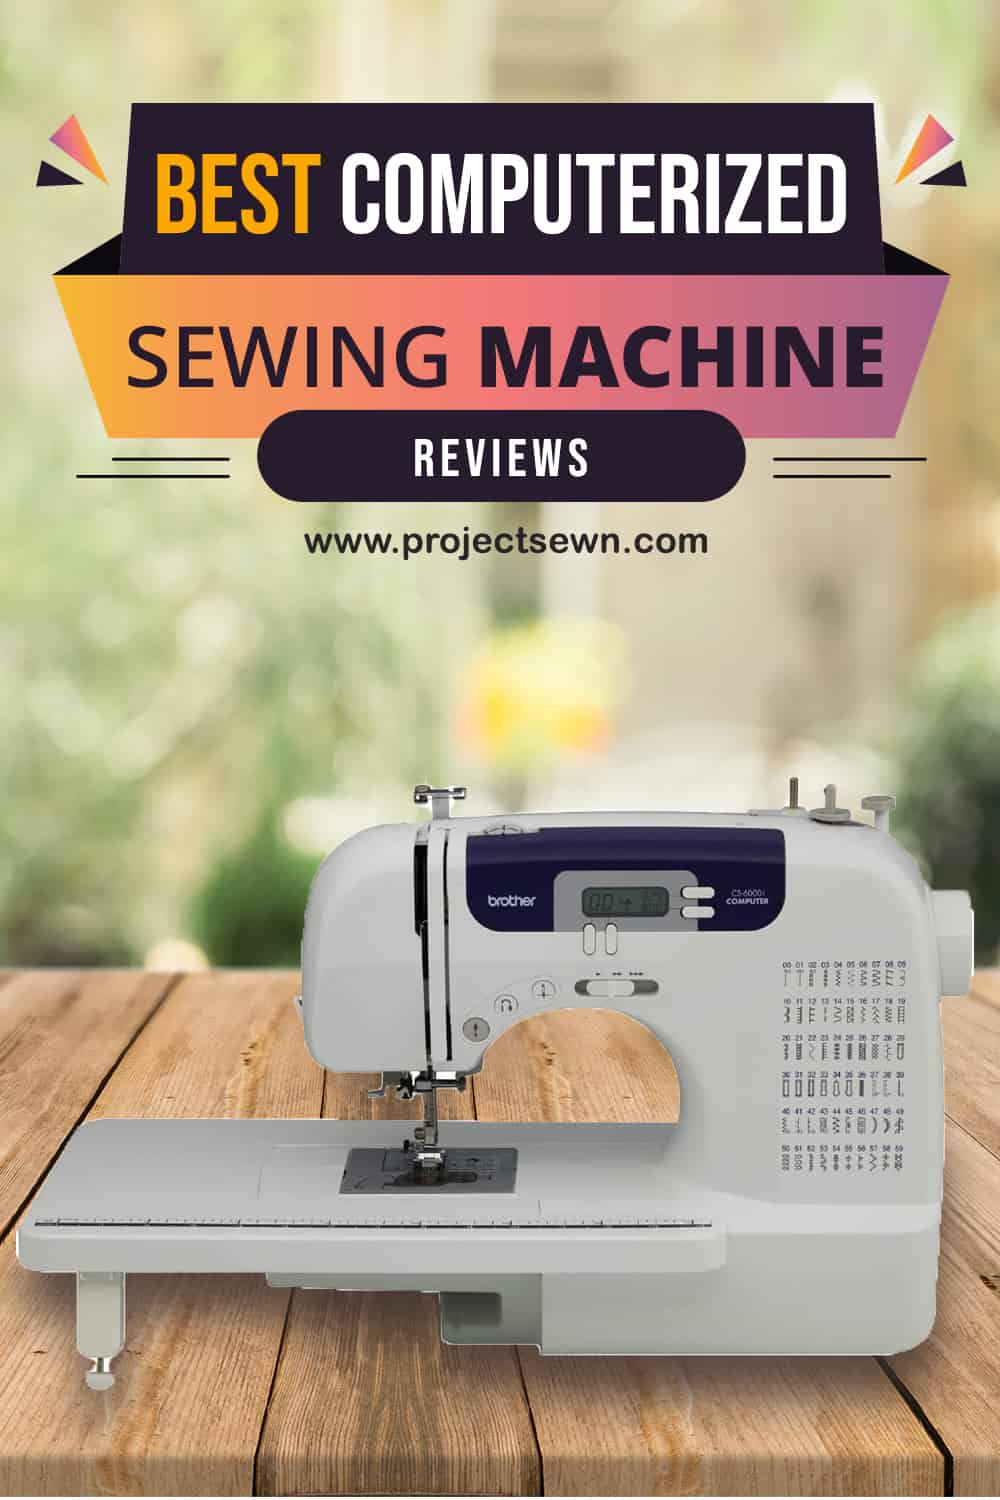 Best Computerized Sewing Machine